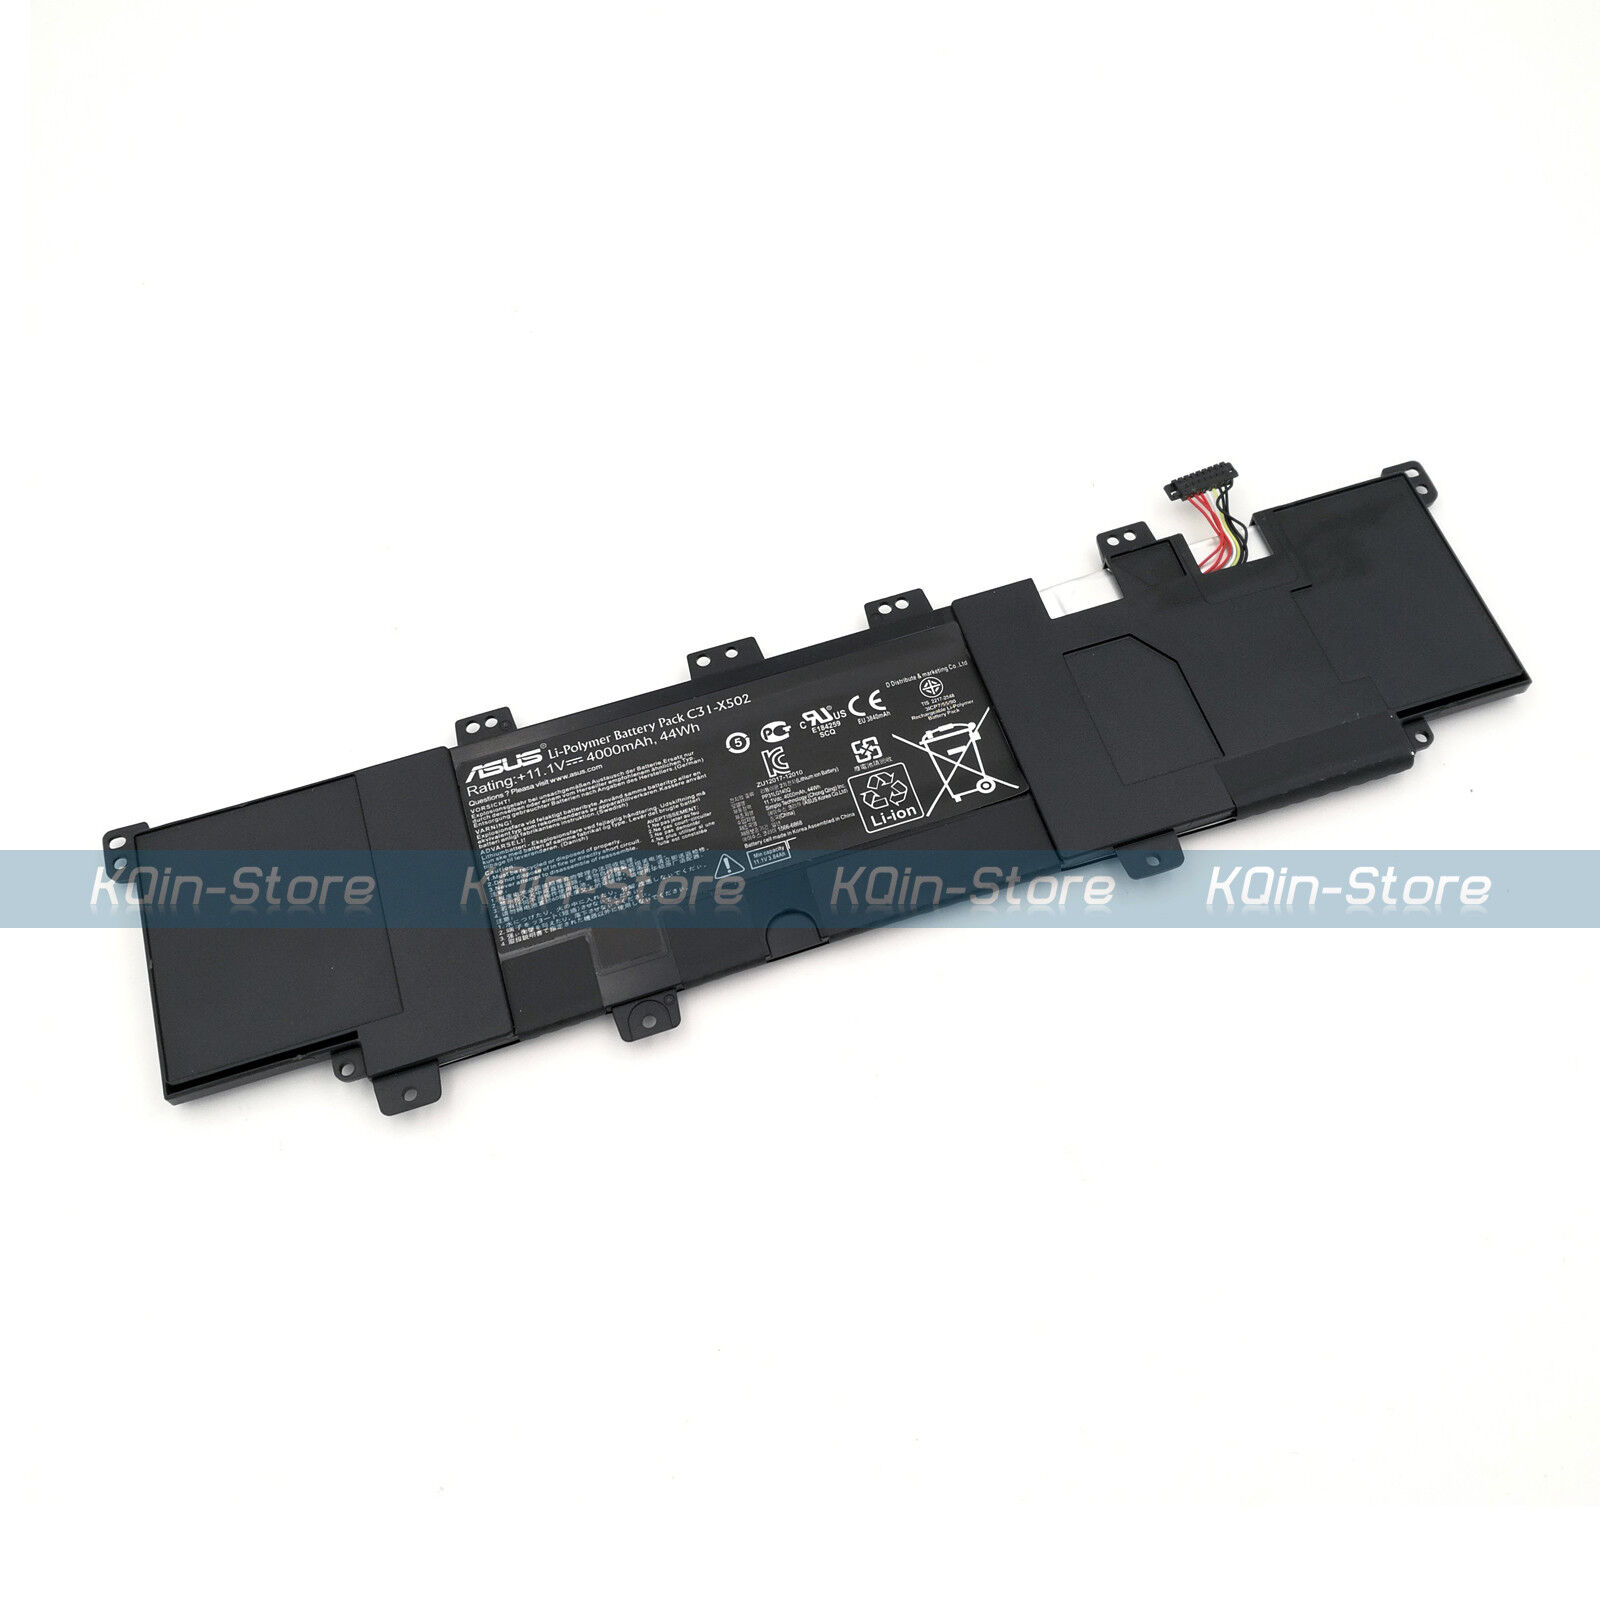 New Genuine C31-X502 44Wh Battery for Asus VivoBook S500C S500CA PRO500CA PU500 